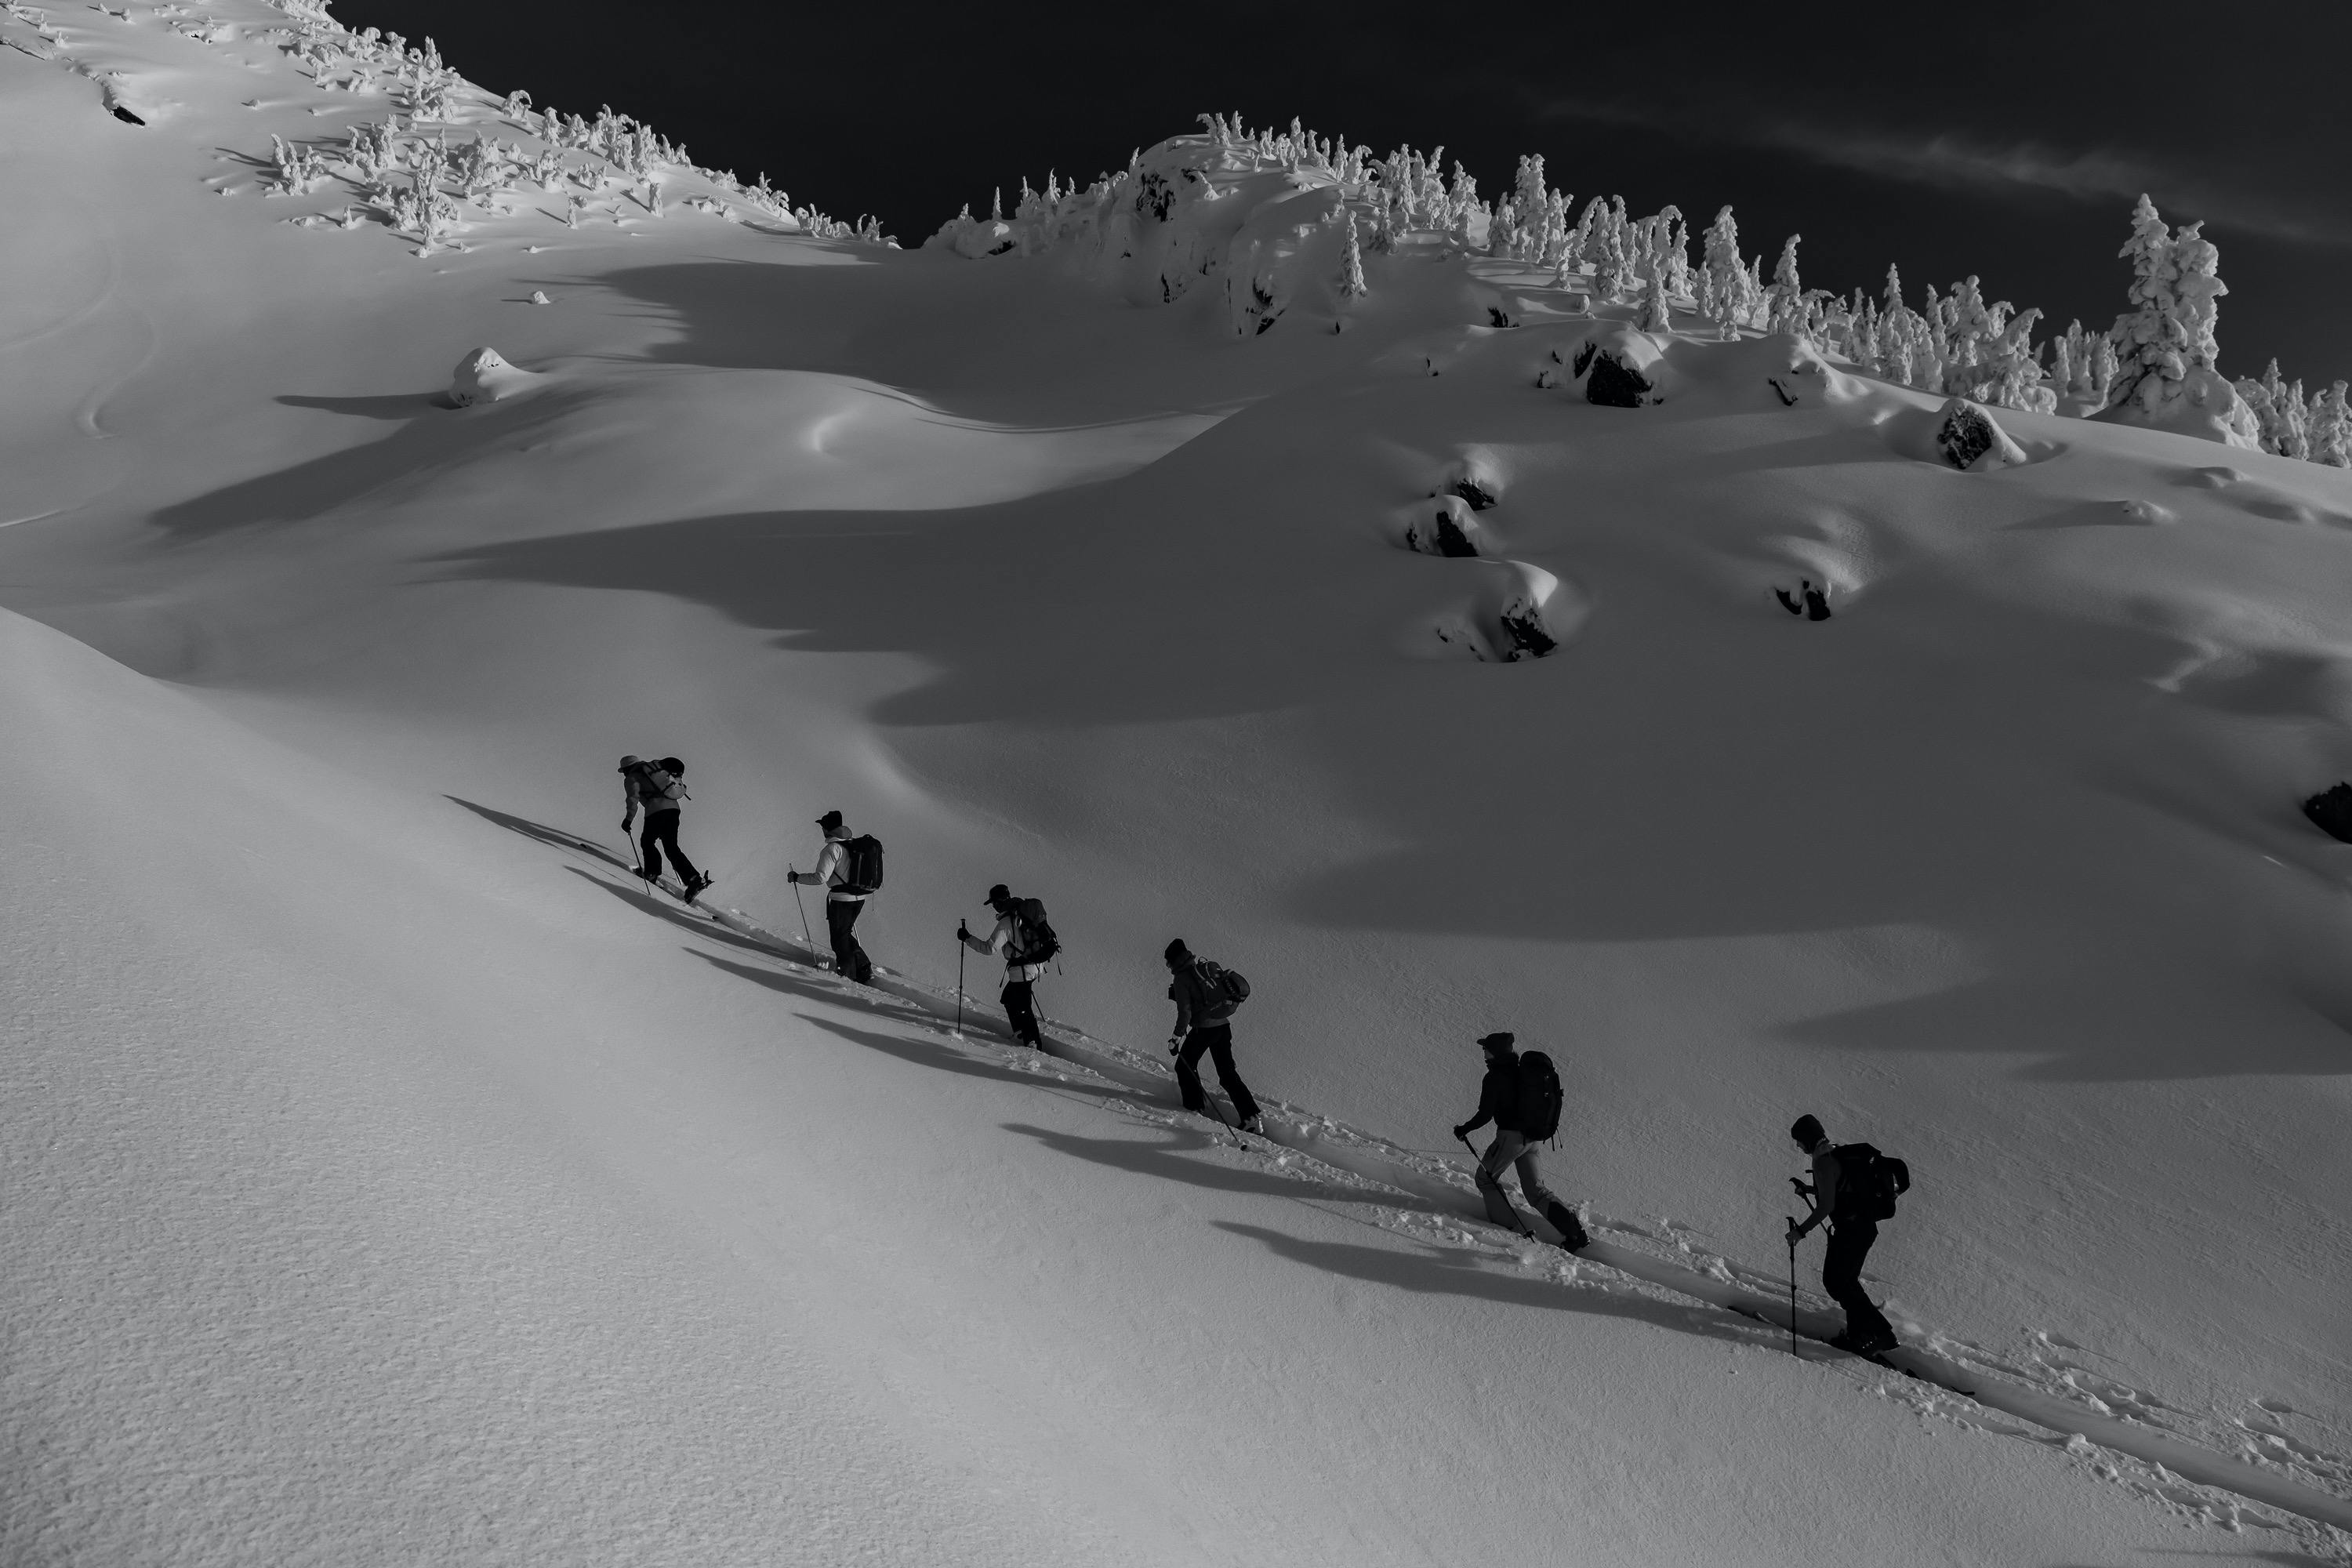 Avalanche Canda/ Open Mountains Youth AST 2 Course, Revelstoke BC.   - Photo Bruno Long